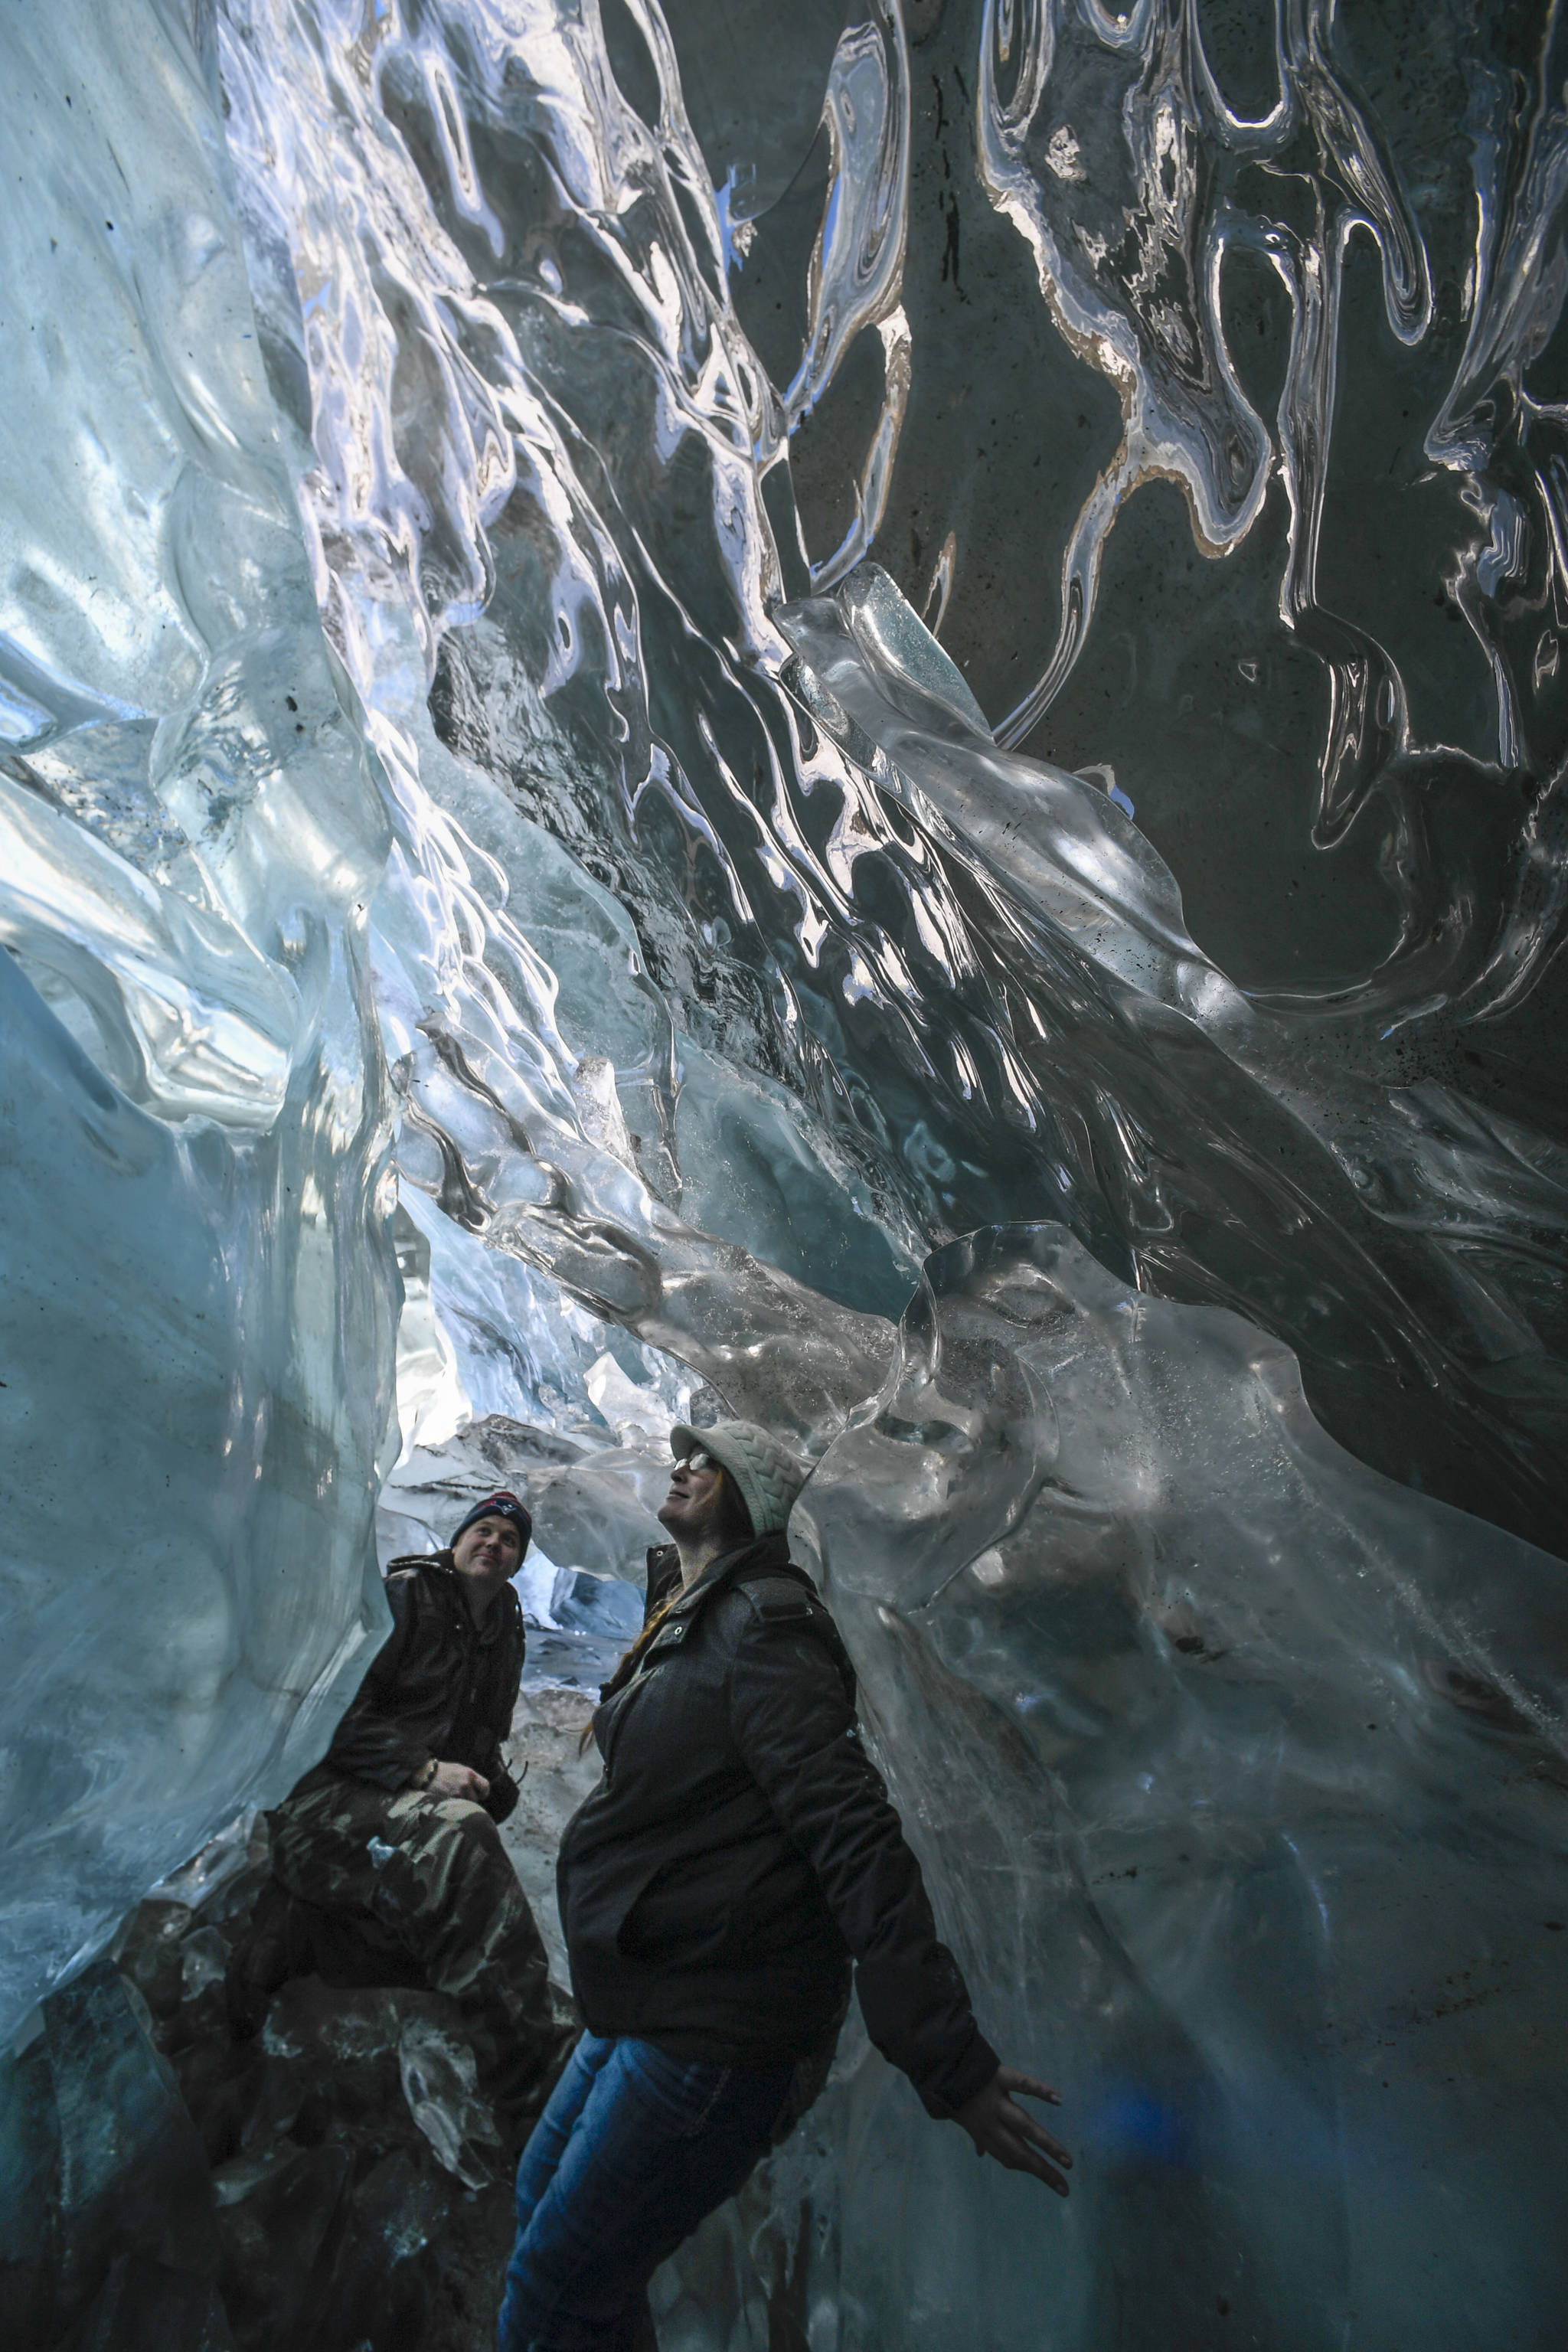 Helen Rice and her husband, Jason Writesel, visiting from Ohio, explore an ice cave at the Mendenhall Glacier on Monday, Feb. 11, 2019. (Michael Penn | Juneau Empire)